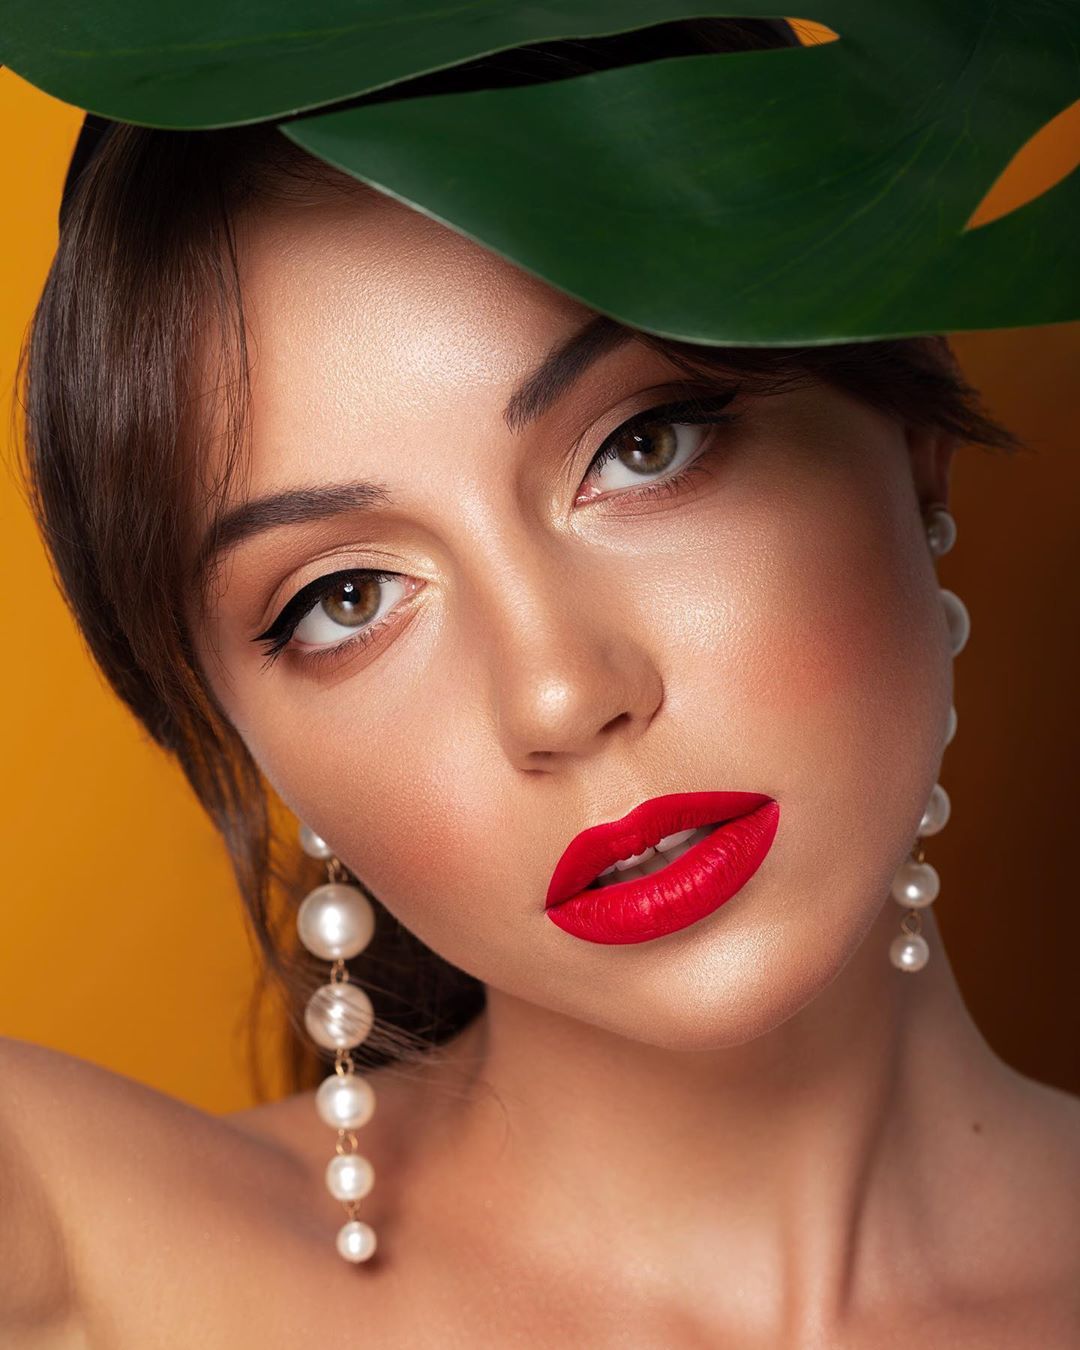 Lady With Red Lips And Pearl Earrings